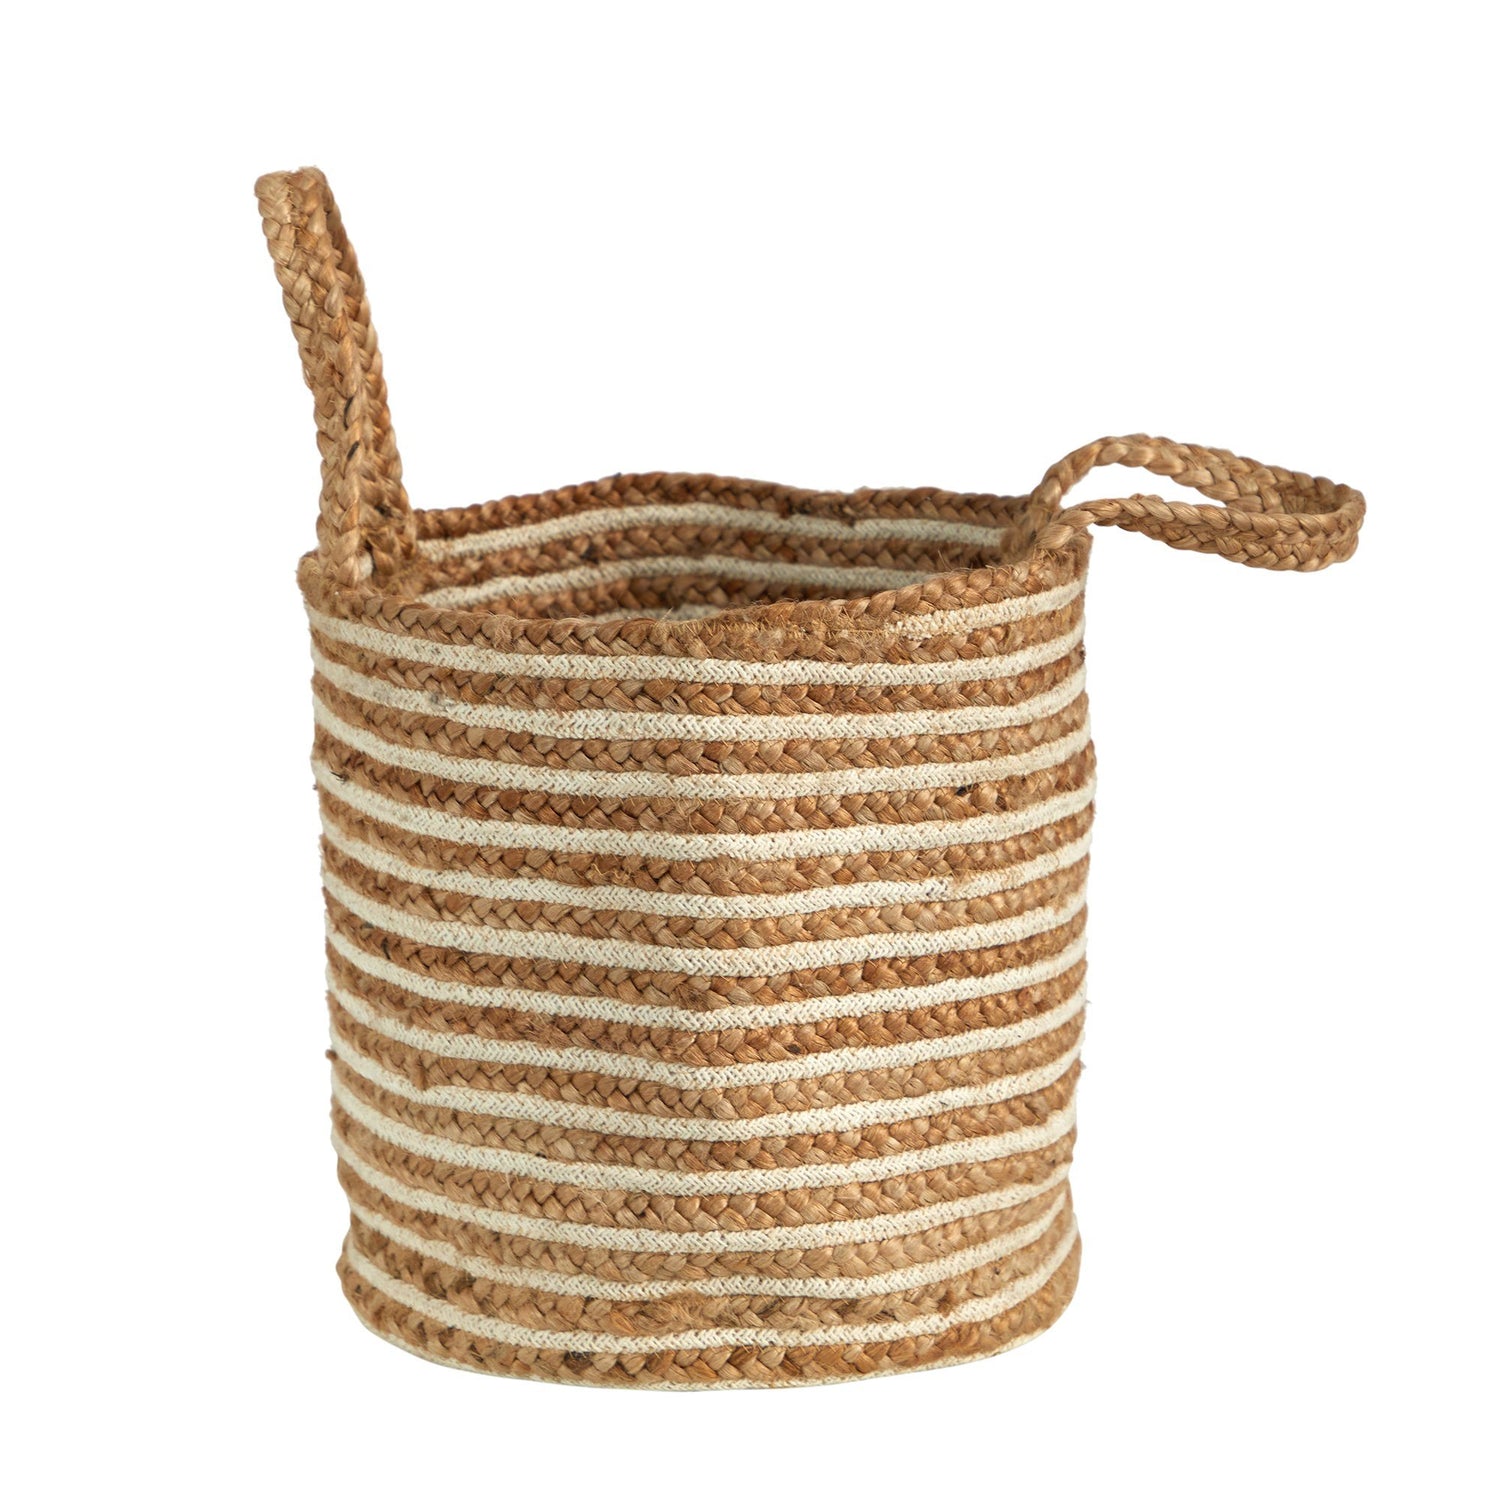 14” Boho Chic Basket Natural Cotton and Jute, Handwoven Stripe with Handles